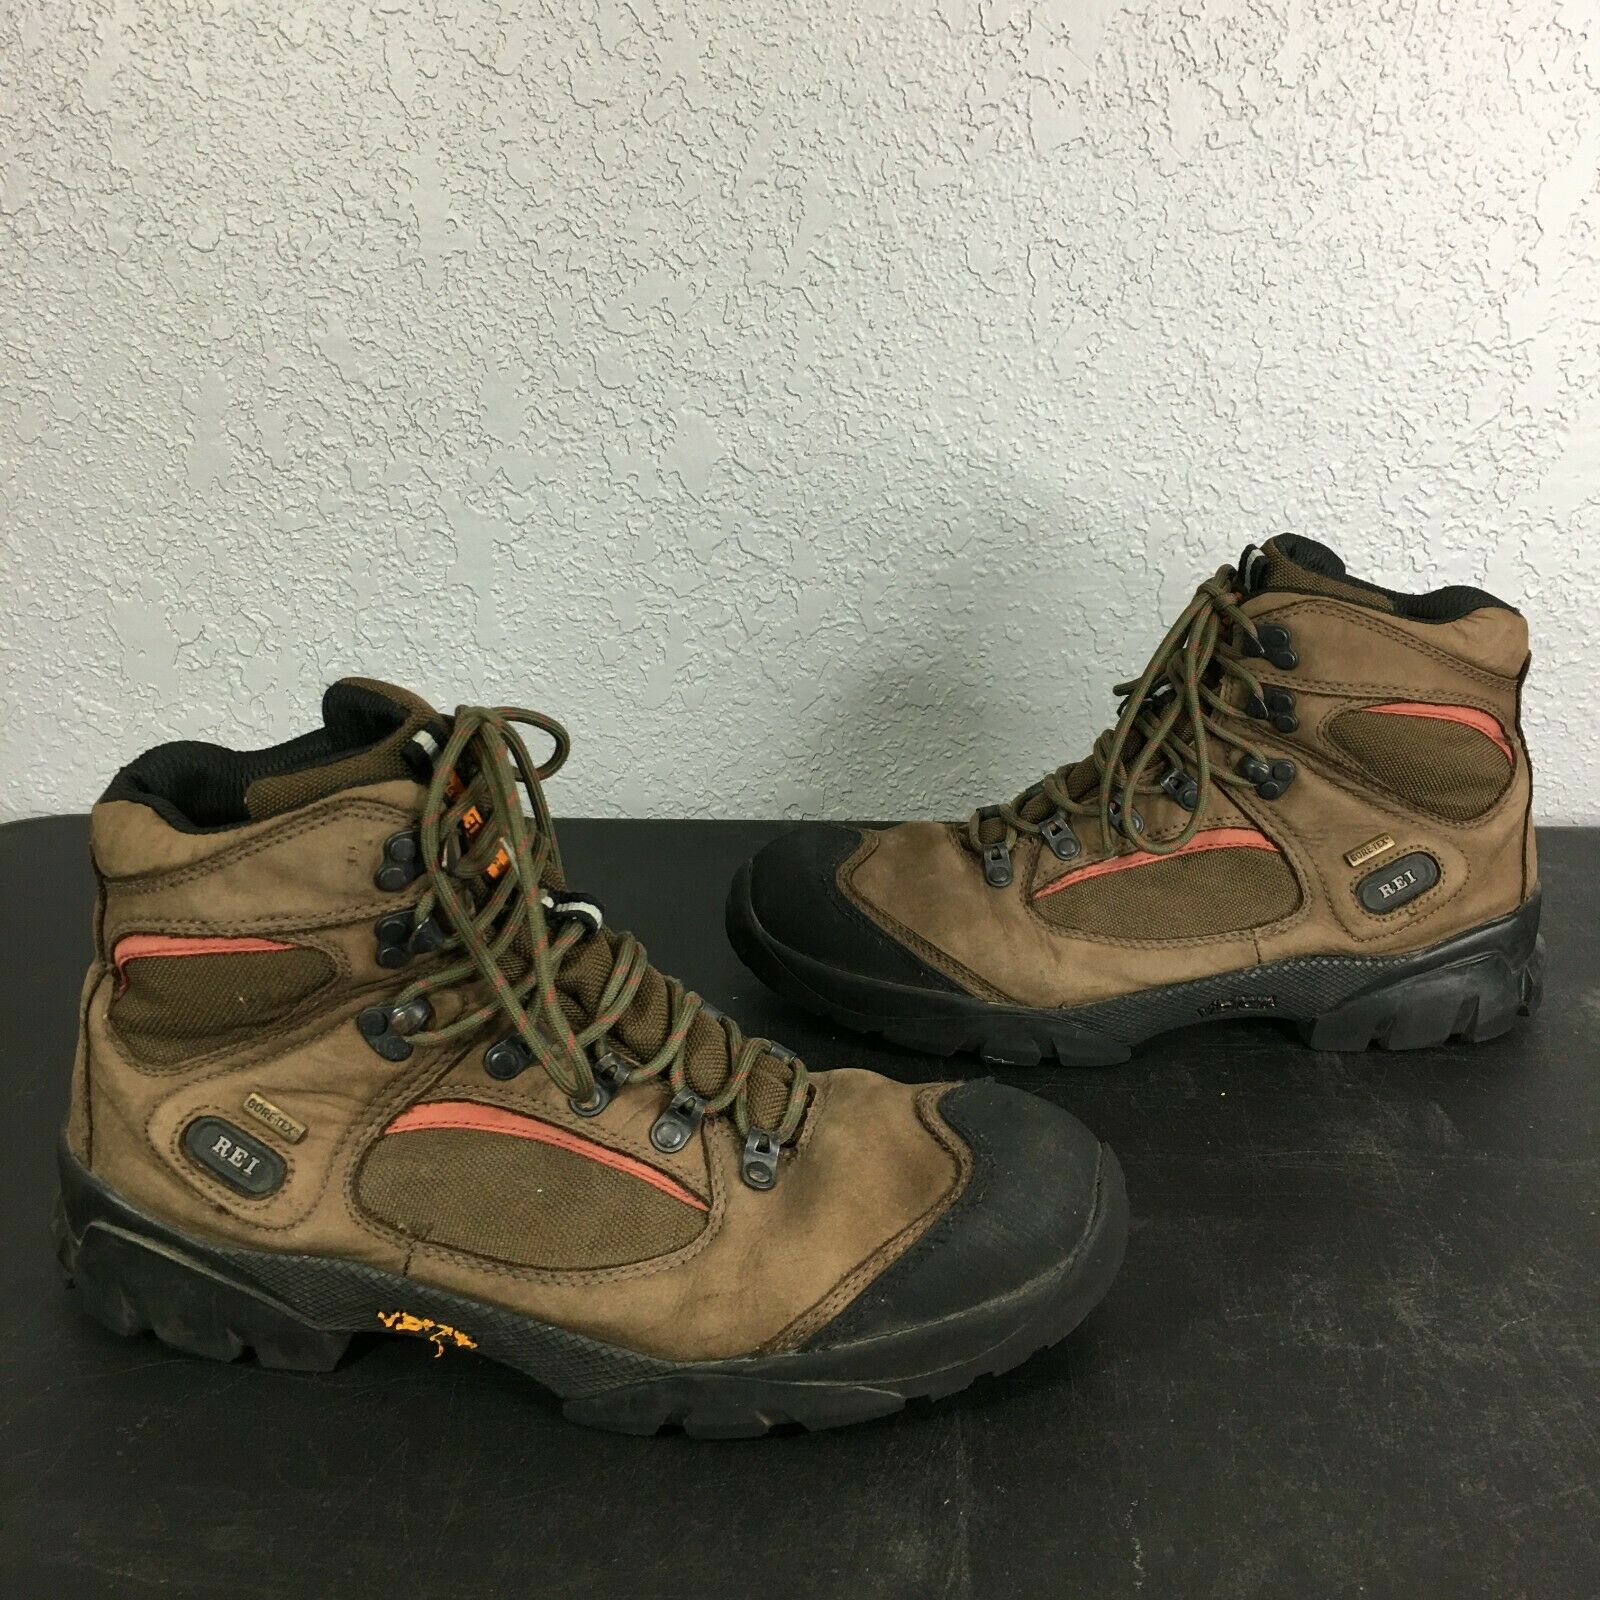 REI Monarch IV Gore Tex Leather Hiking Boots Bark Brown Men’s 10.5